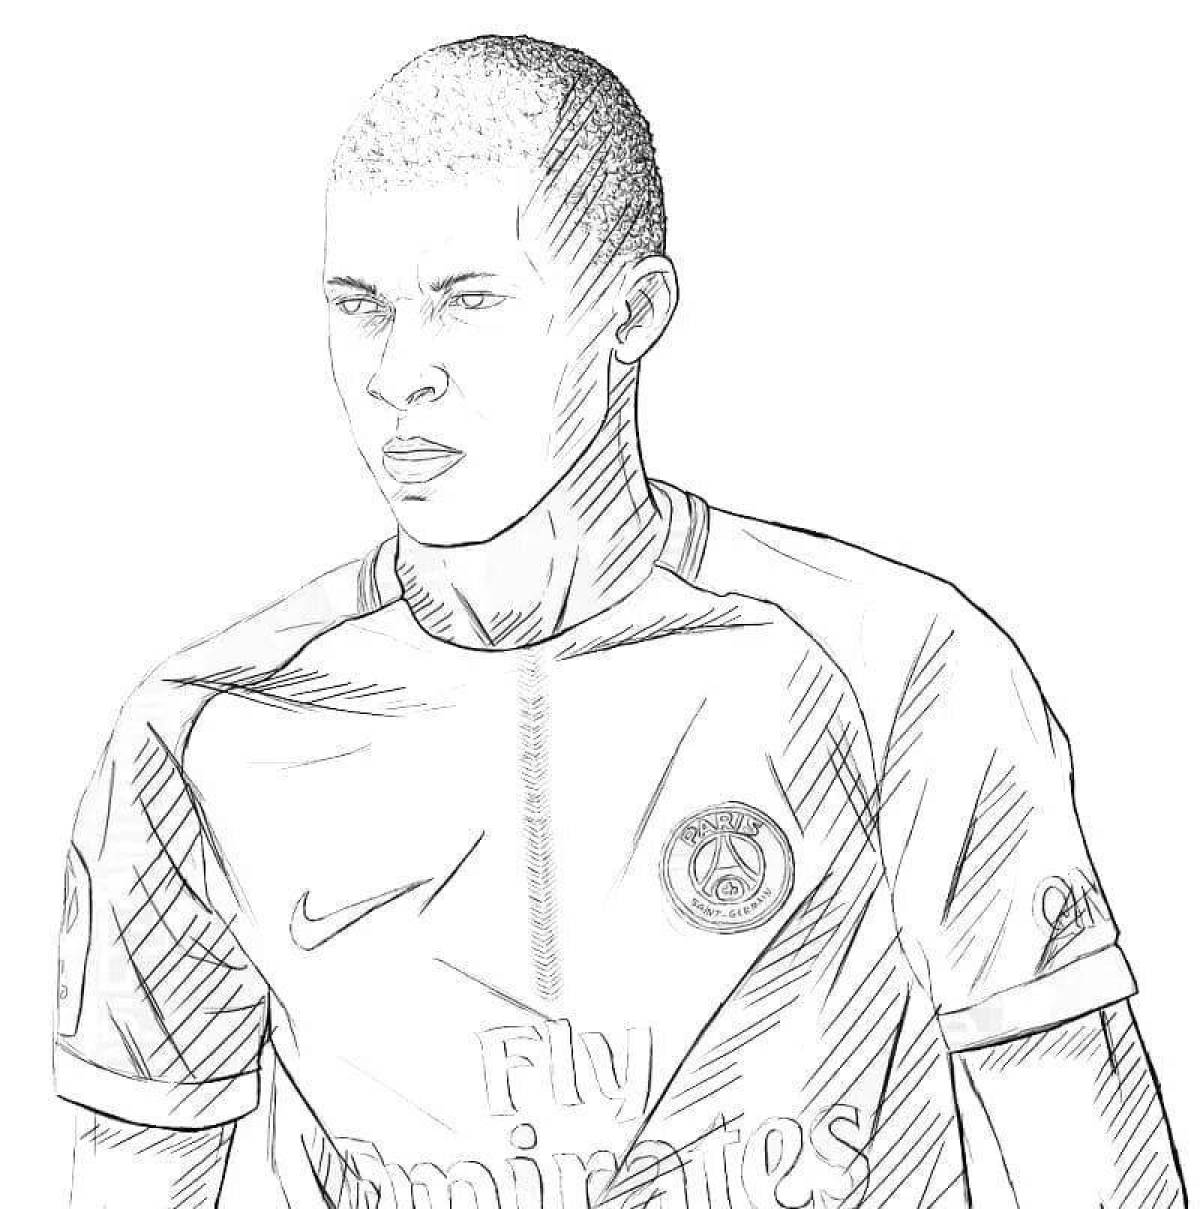 Coloring page of a fascinating football player